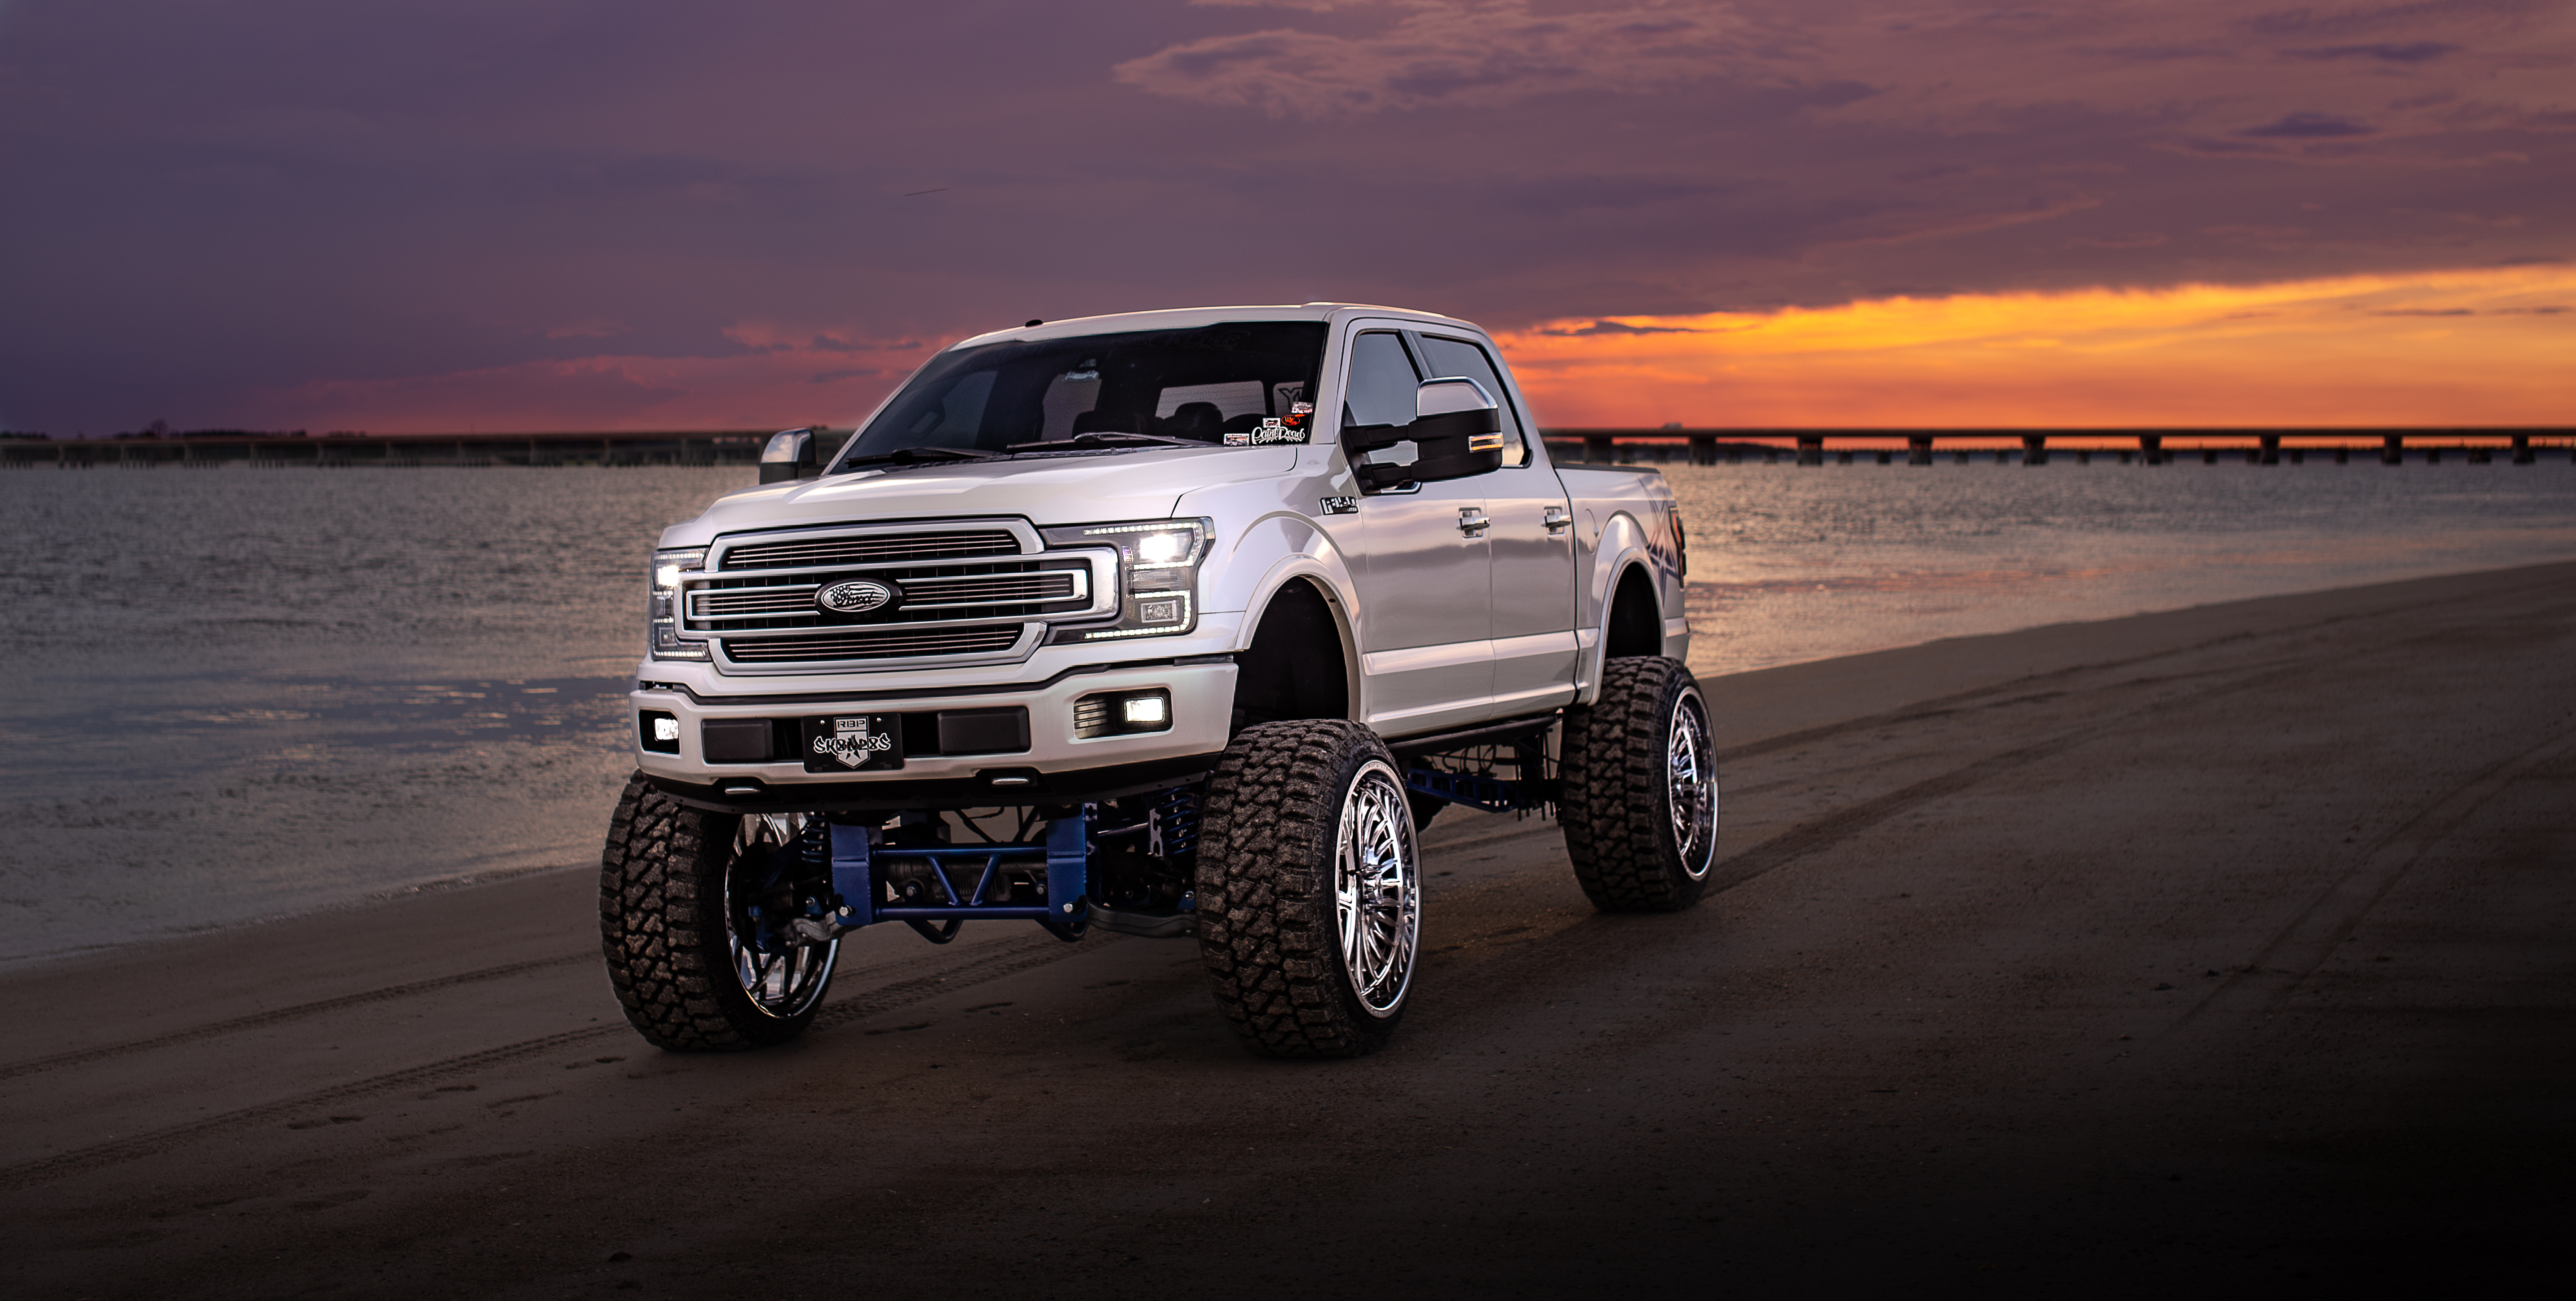 Ford F150 10 12 Inch Suspension Lift Kit 2015 2019.